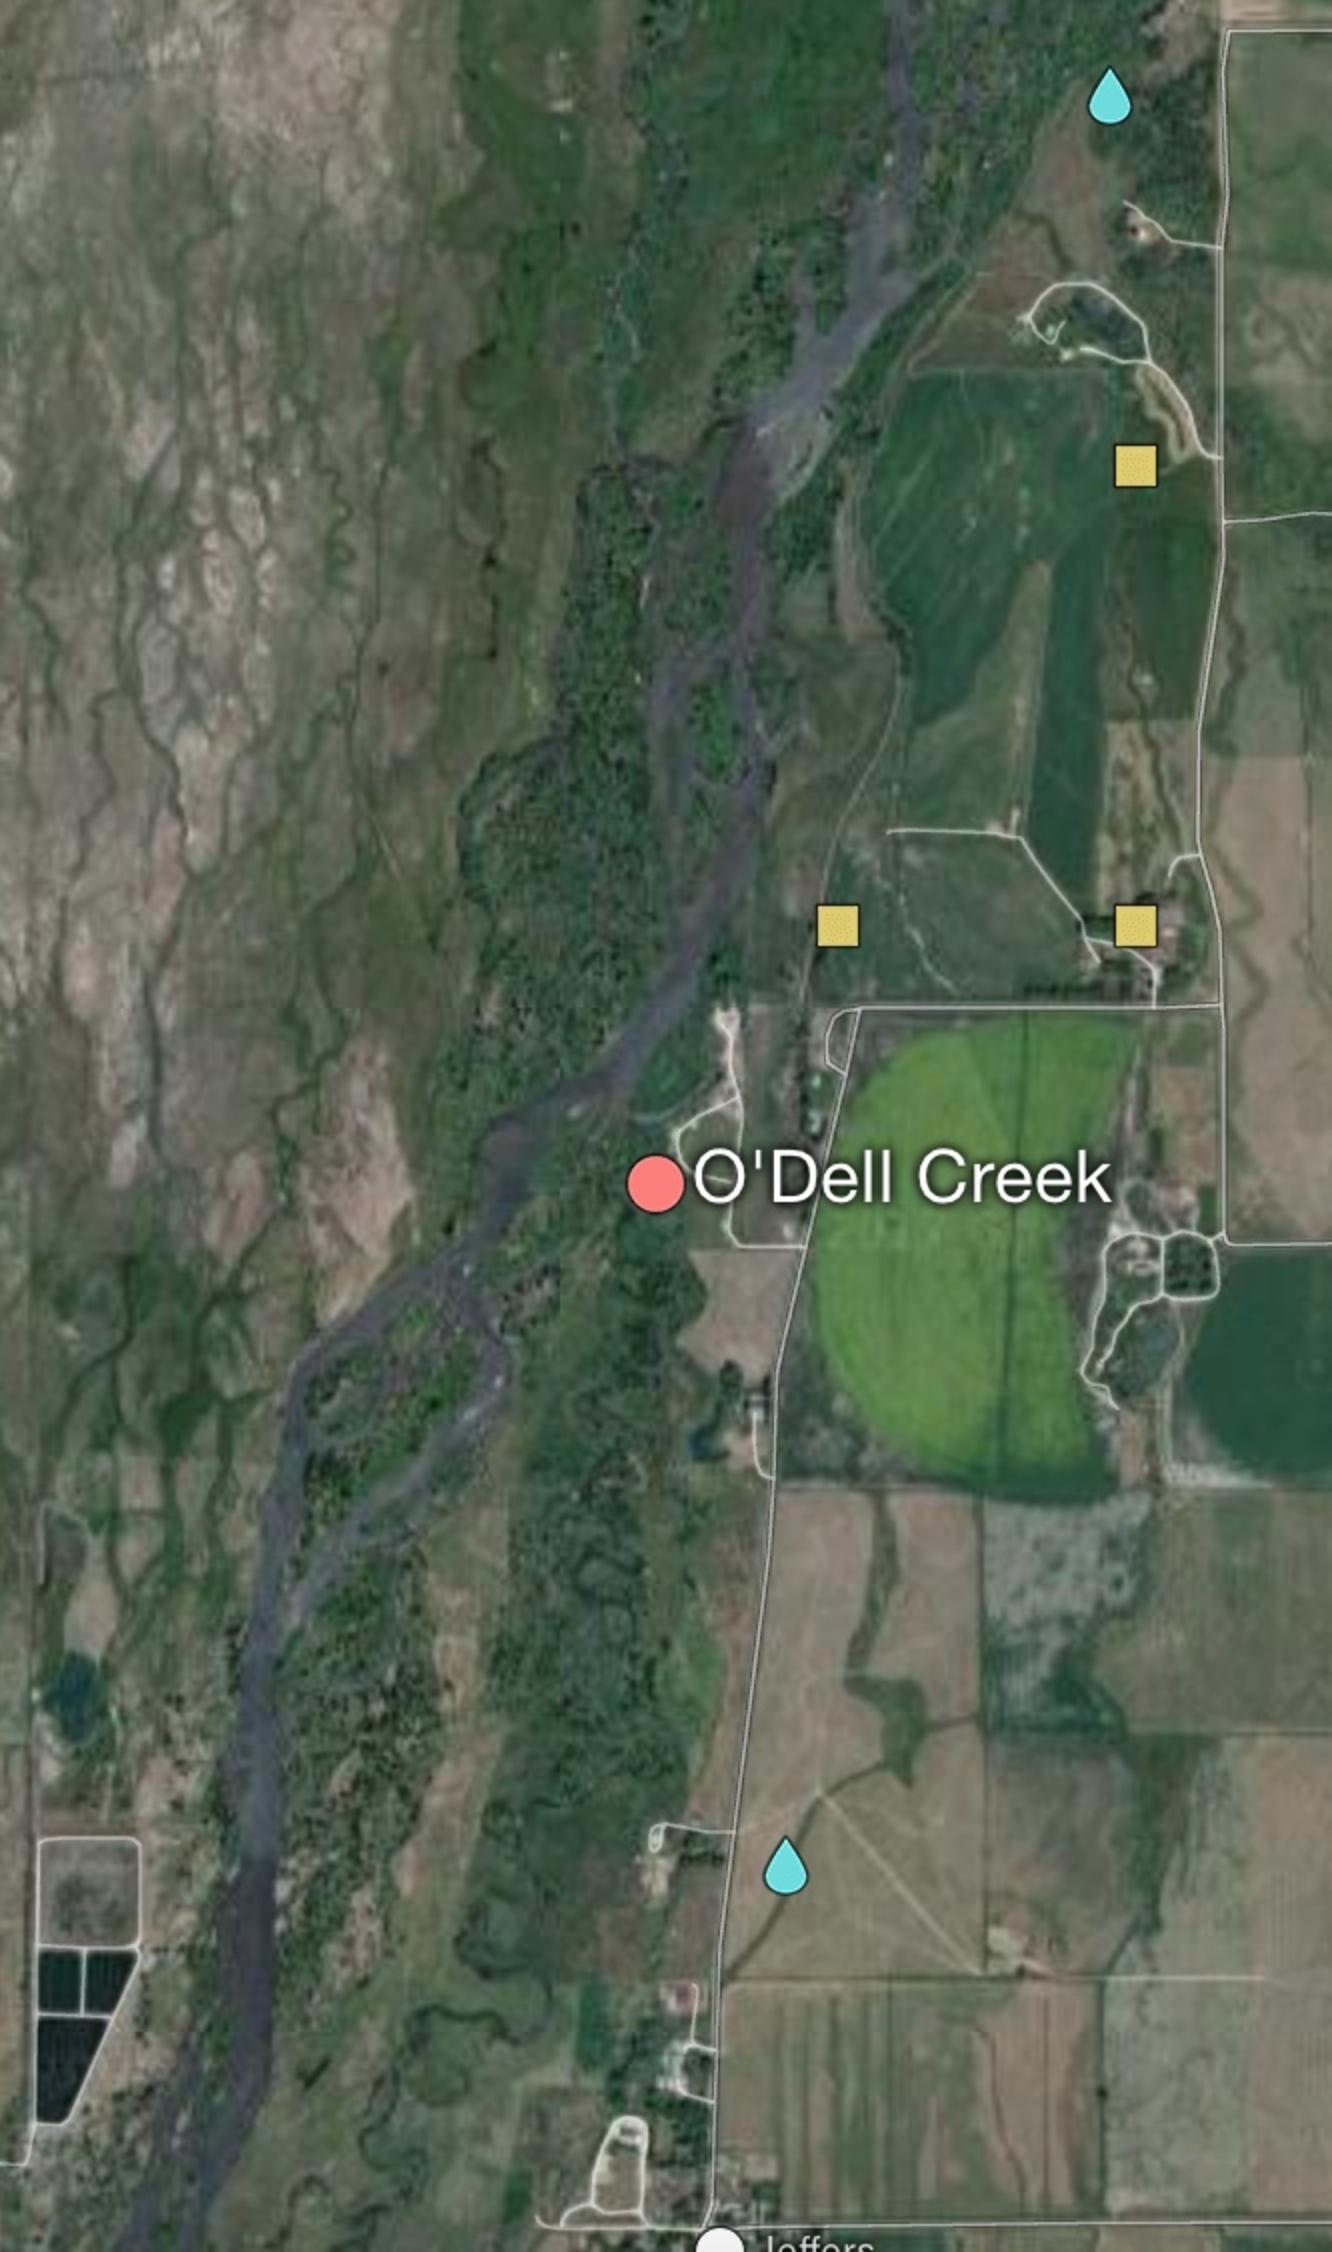 Liam Diekmann's project area encompassed O'Dell Creek and all of its reach, photo courtesy Mapcarta